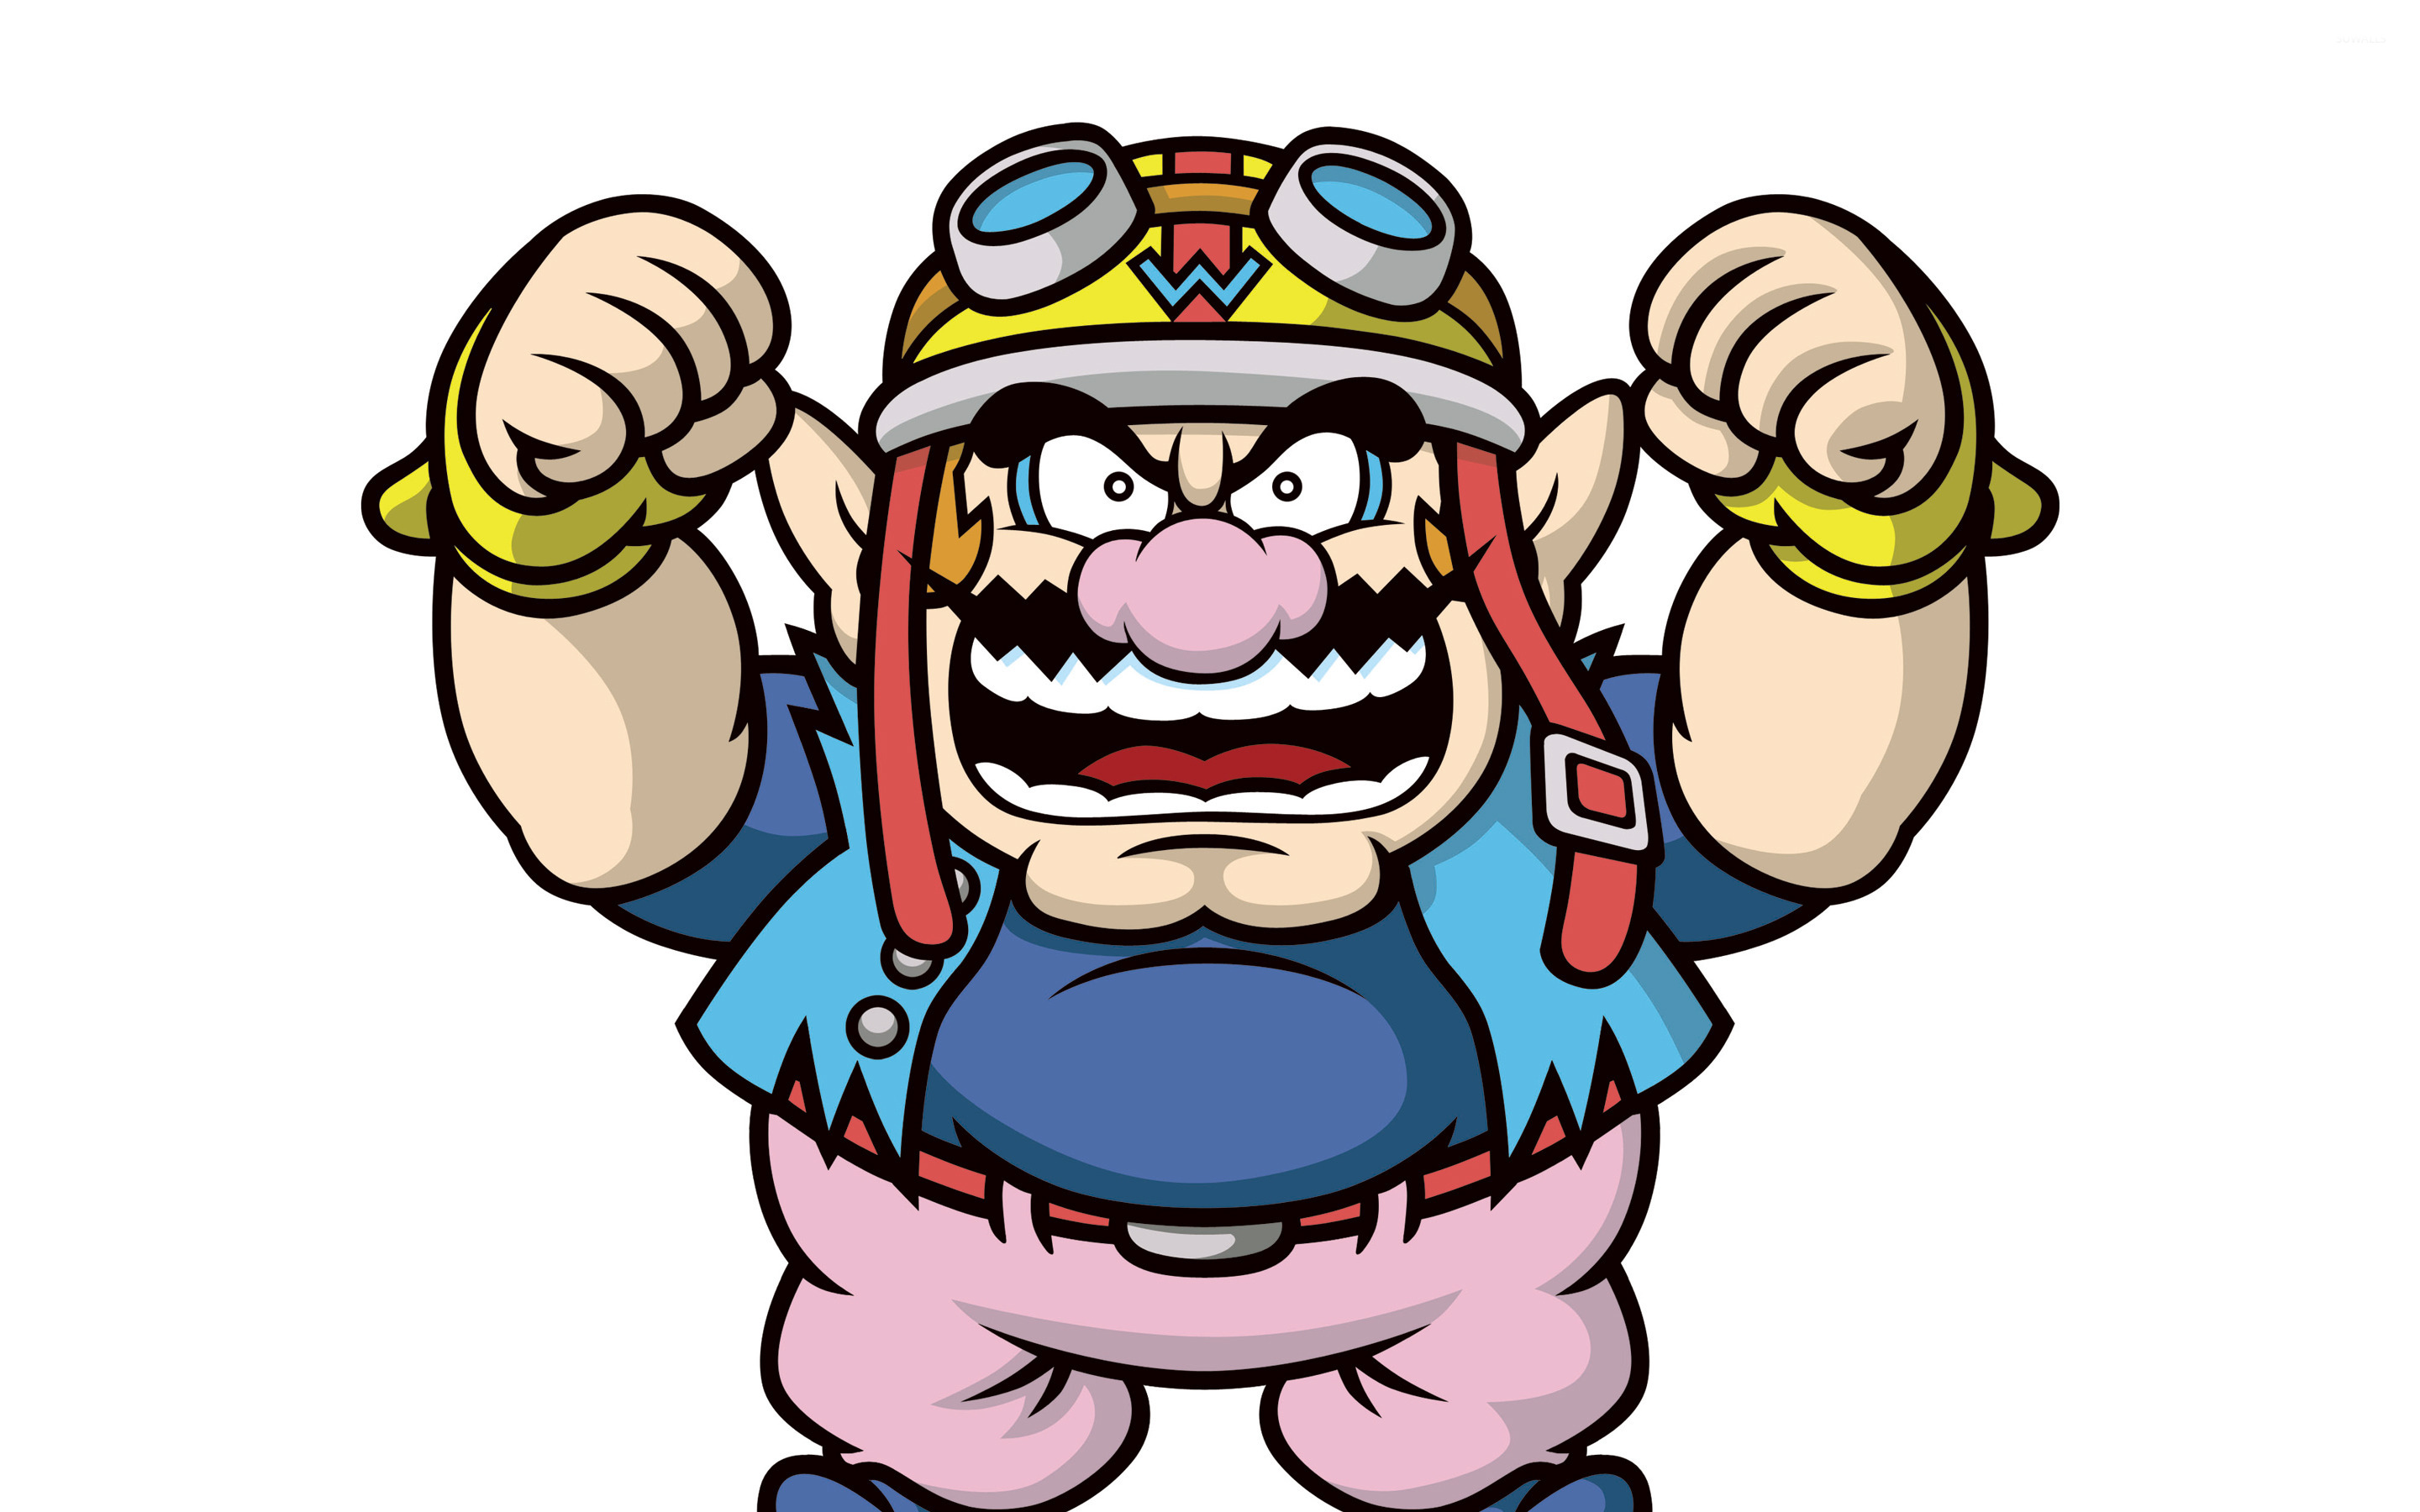 Download Wario World wallpapers for mobile phone free Wario World HD  pictures